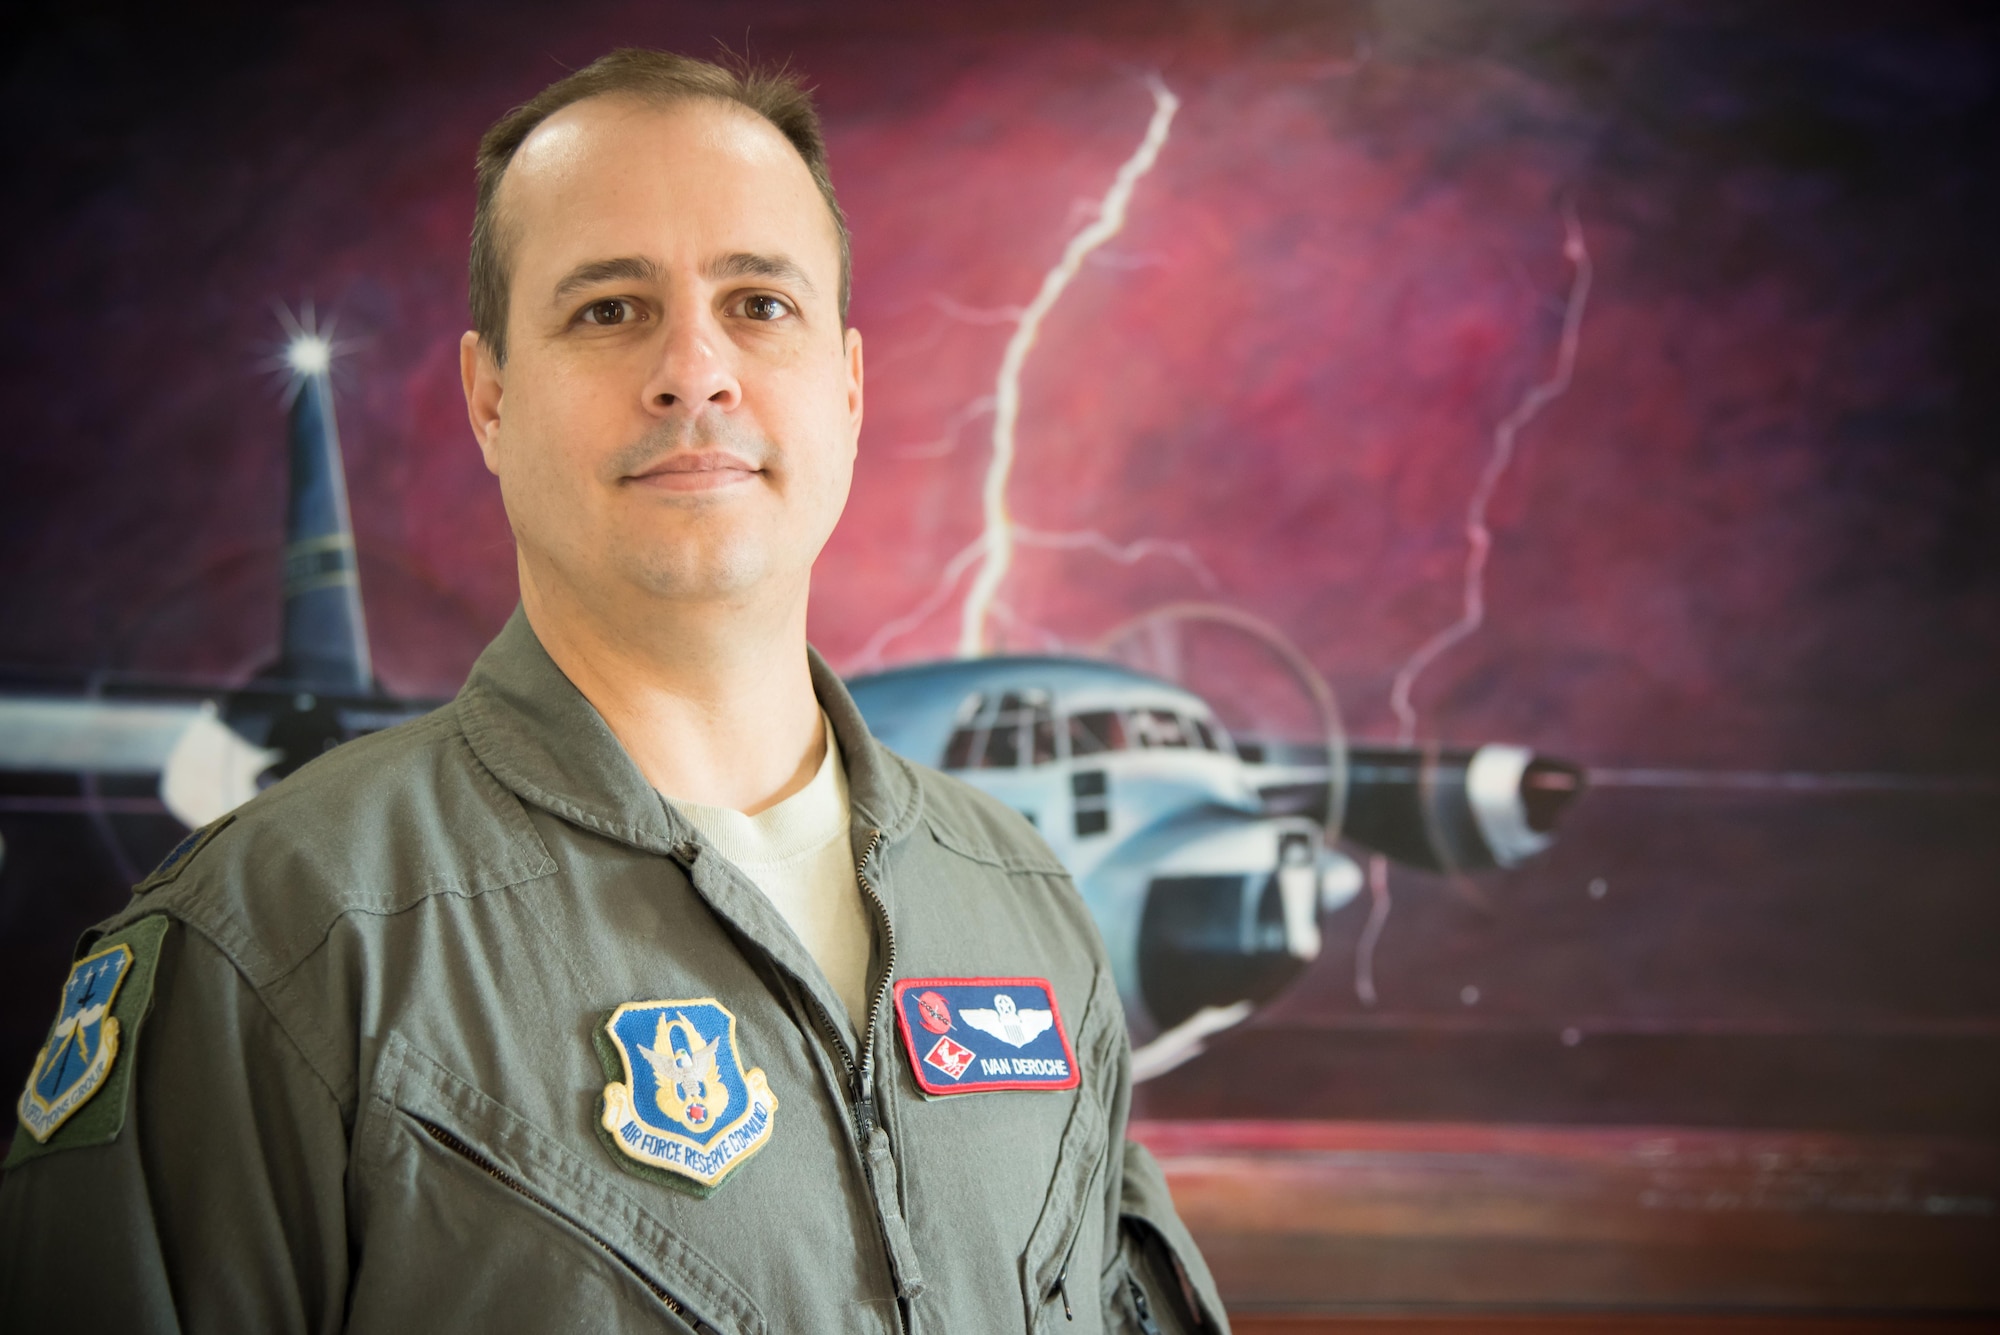 Lt. Col. Ivan Deroche, 403rd Operations Group chief of standardization and evaluation, poses for a photo Oct. 12, 2017 at Keesler Air Force Base, Mississippi. Deroche was recently named the Air Force Reserve command nominee for the National Aeronautical Association Wright Brothers Memorial Trophy. (U.S. Air Force photo/Staff Sgt. Heather Heiney)